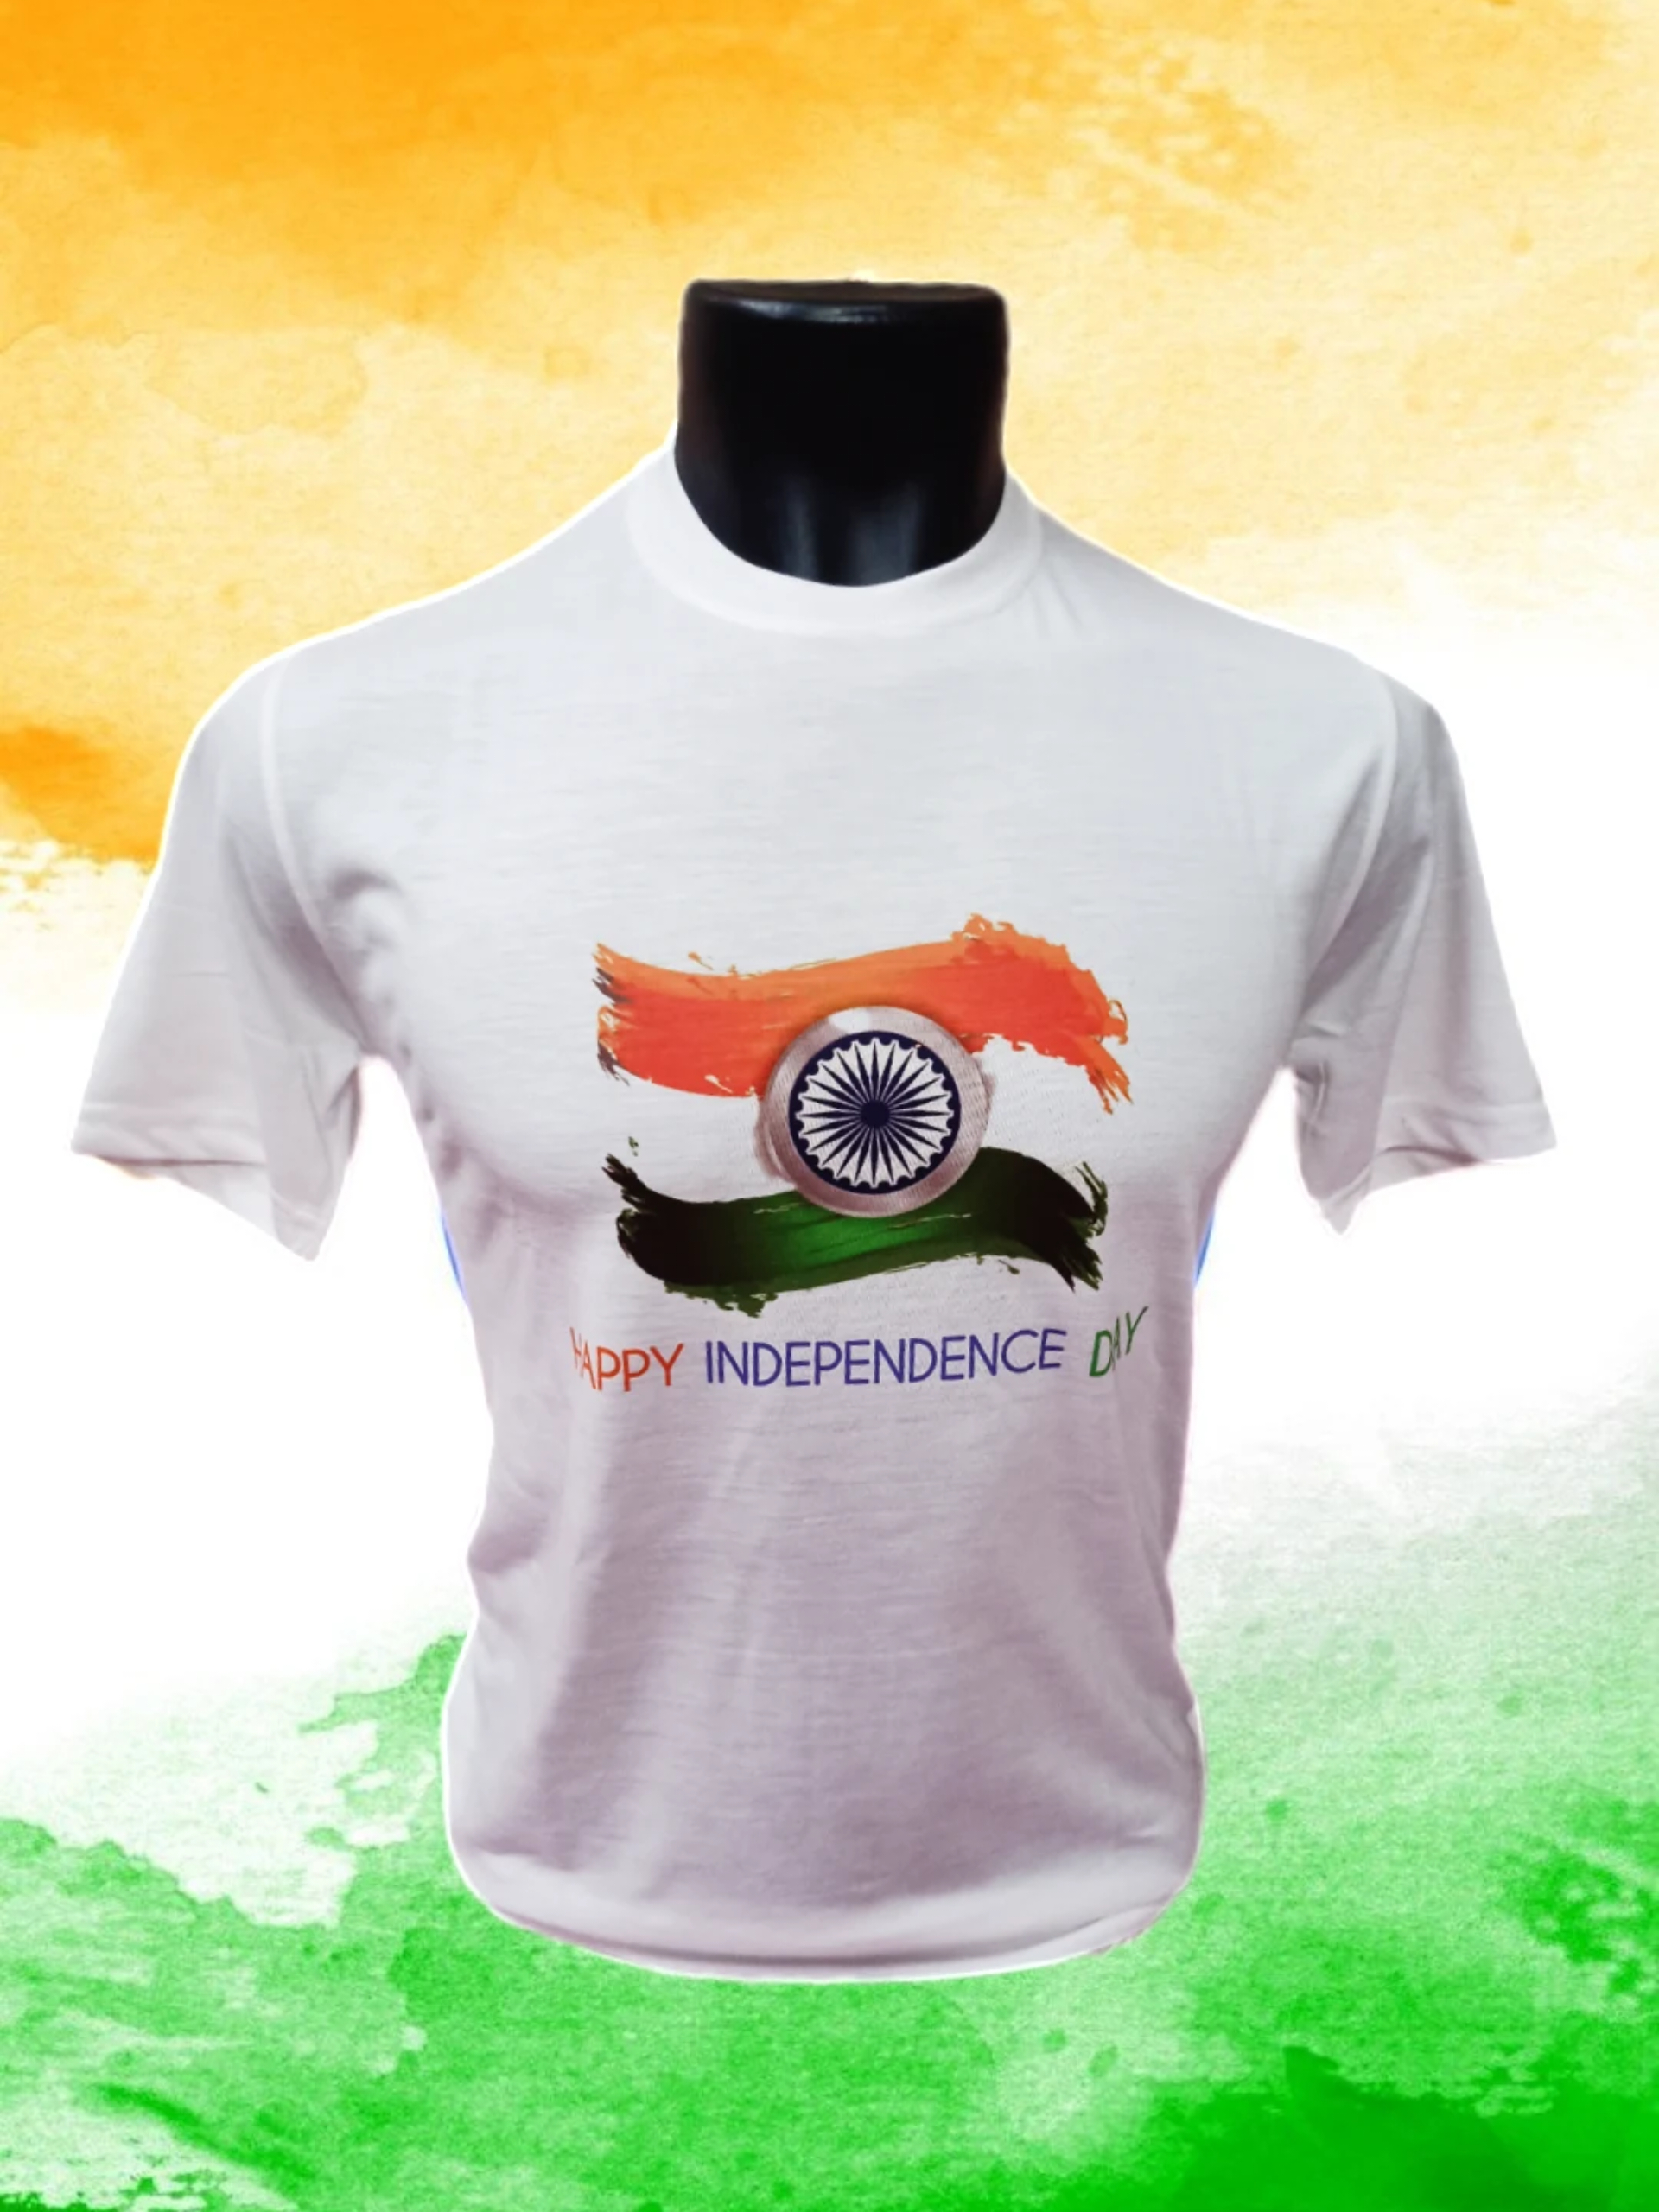 INDEPENDENCE DAY T-SHIRT